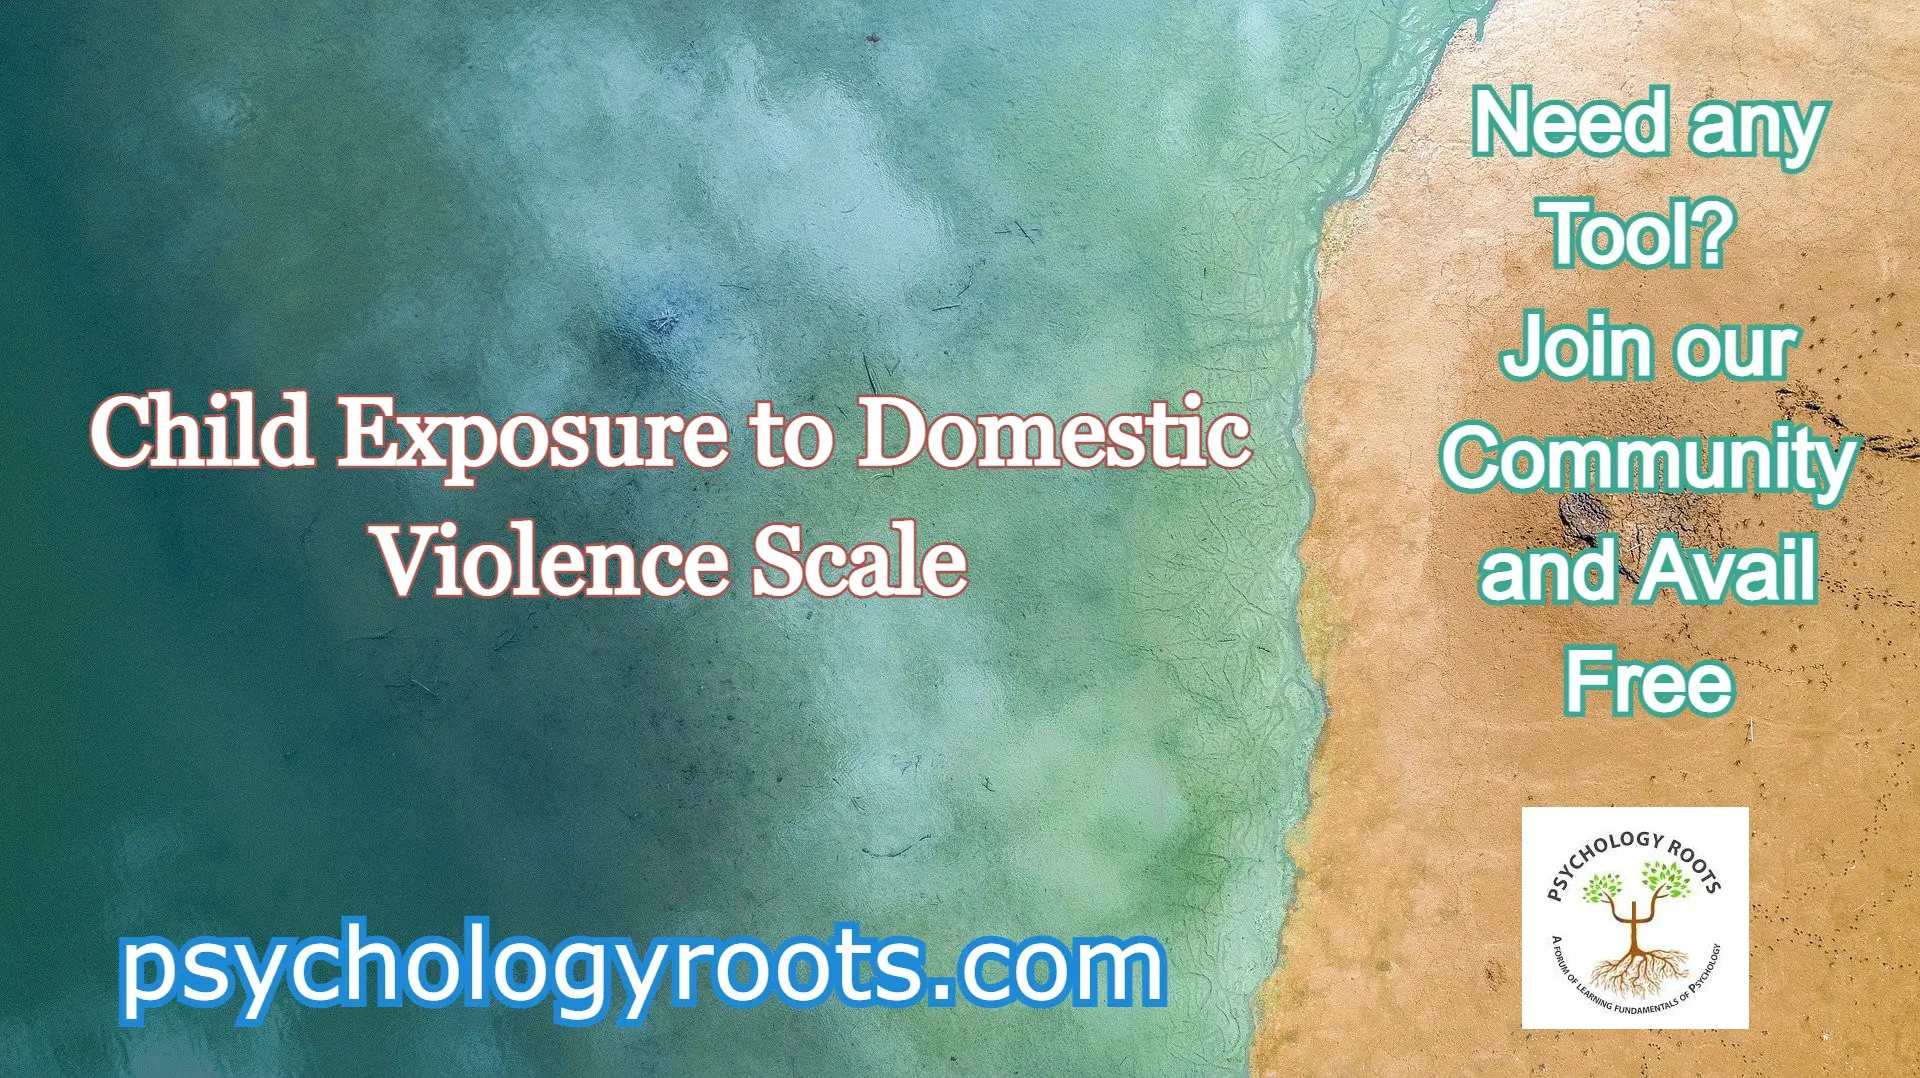 Child Exposure to Domestic Violence Scale